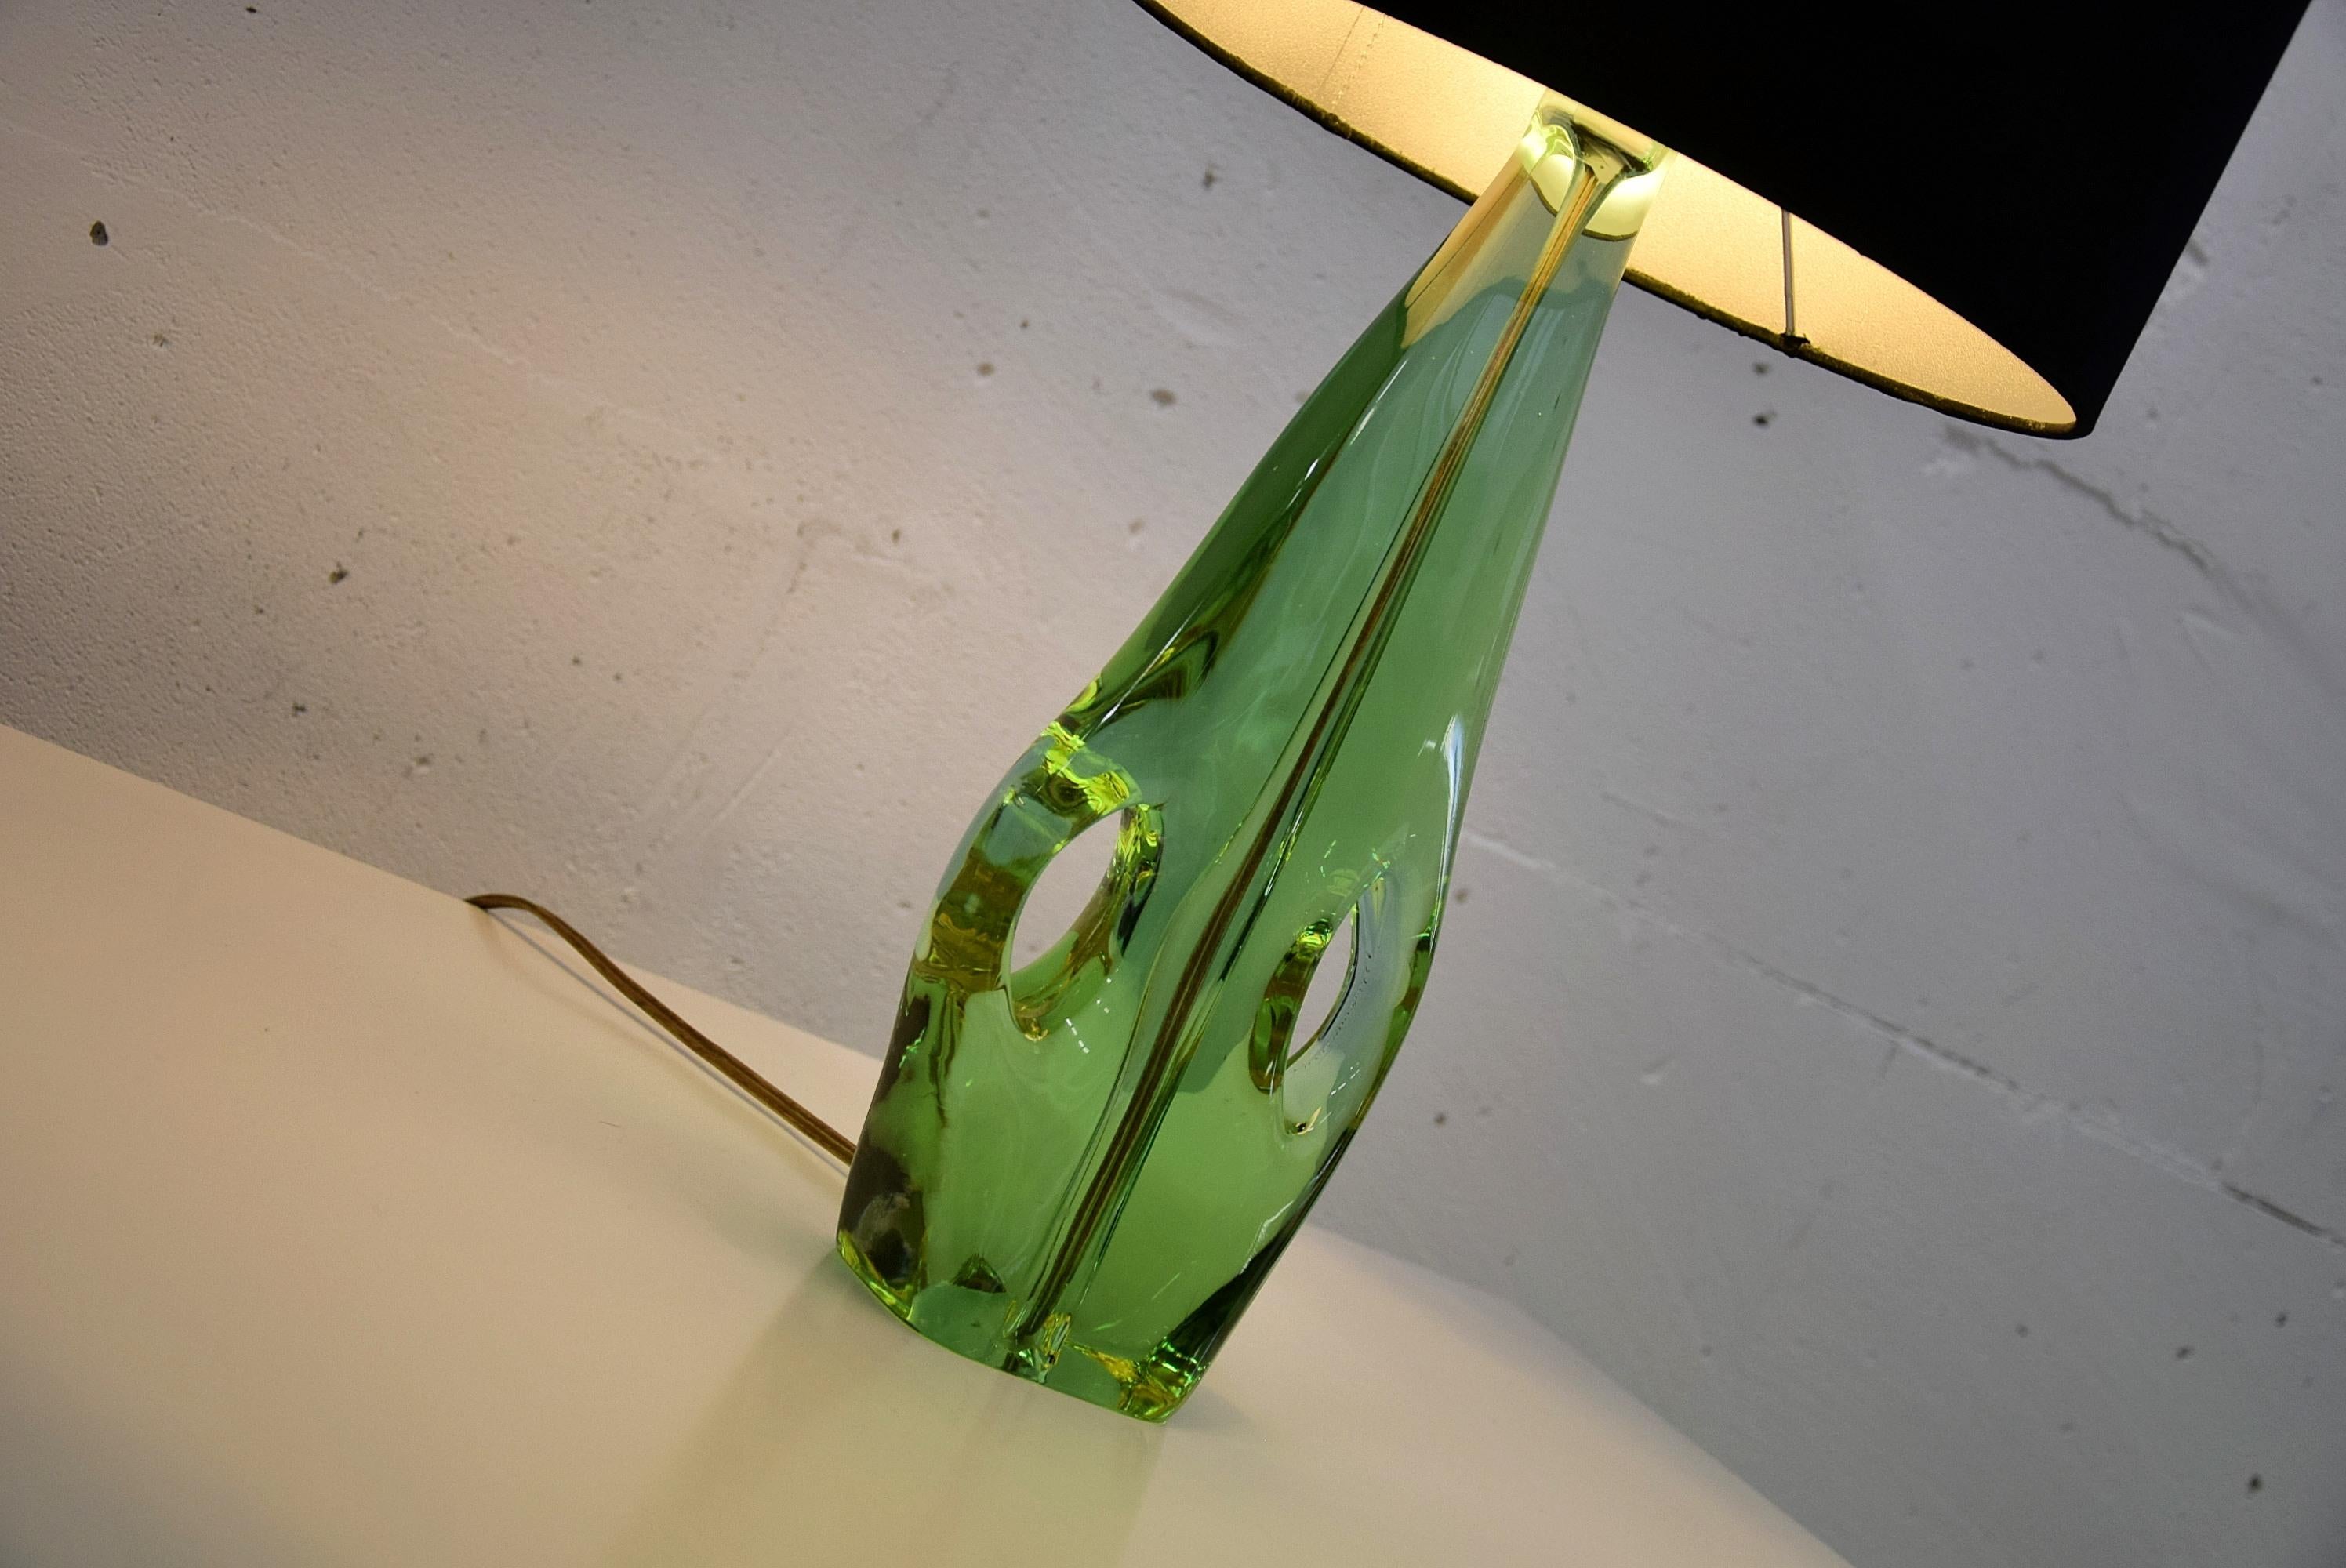 Blown glass mid century modern french table lamp.
Beautiful sophisticated 1950s french blown glass table lamp in great condition.
We had a new shade made in a dark racing green crepe material which fits the gorgeous base perfectly.

Lamp is marked